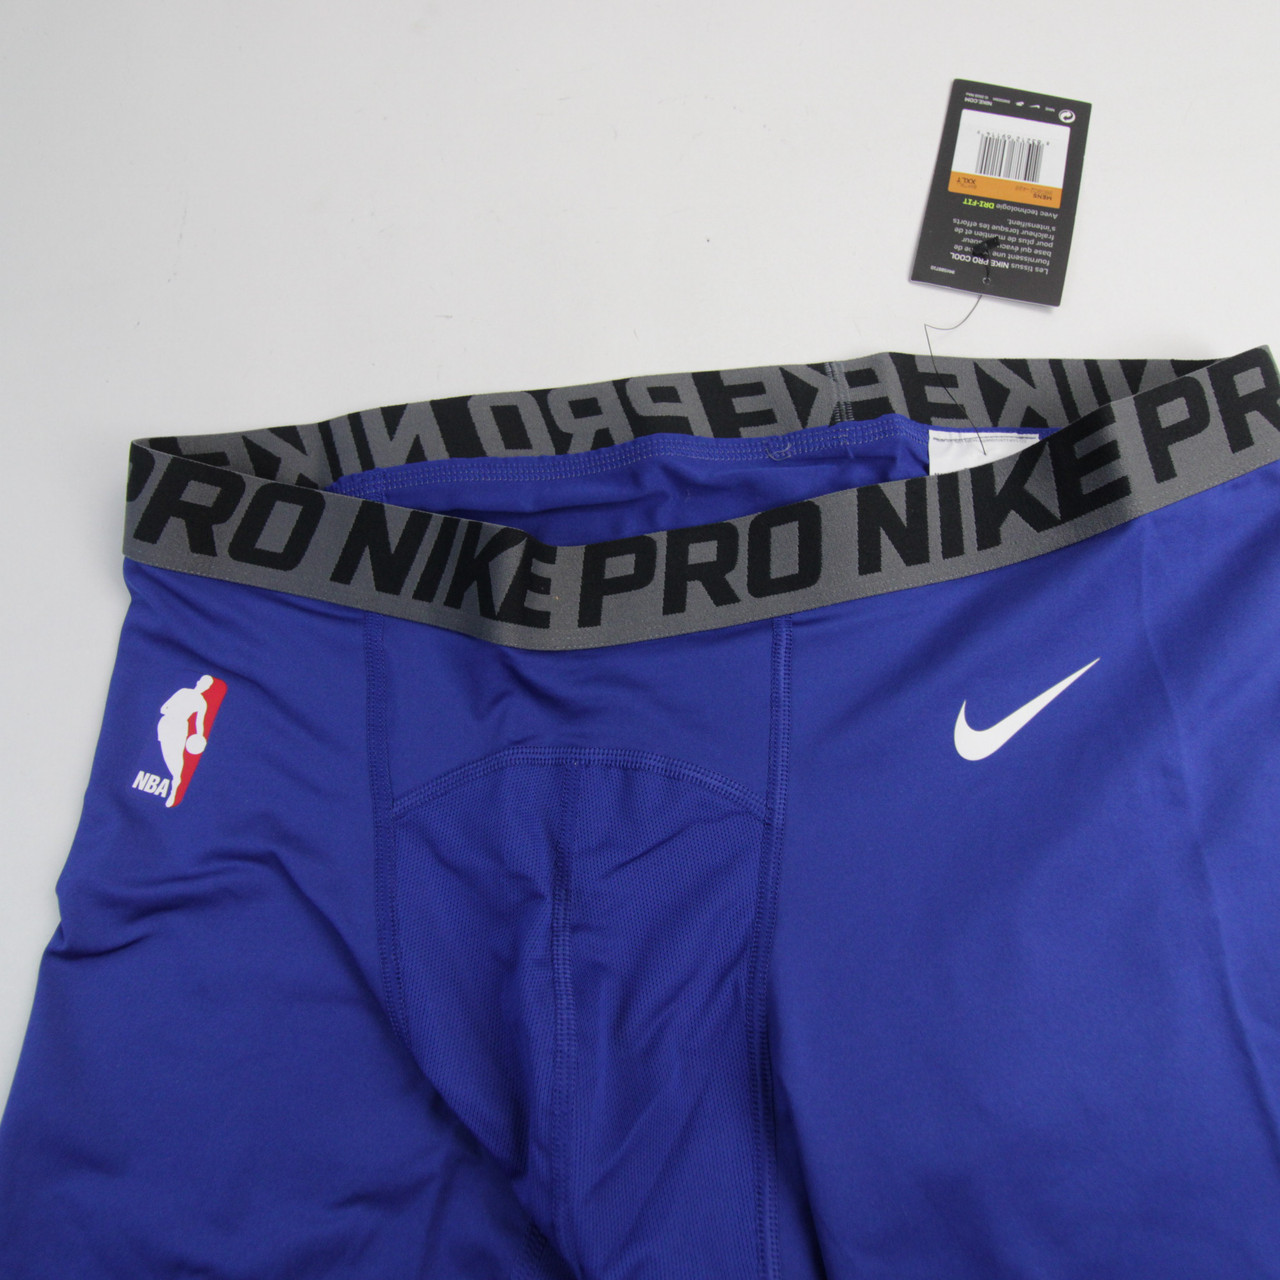 Nike NBA Authentics Compression Shorts Men's Blue New with Tags 2XLT 079